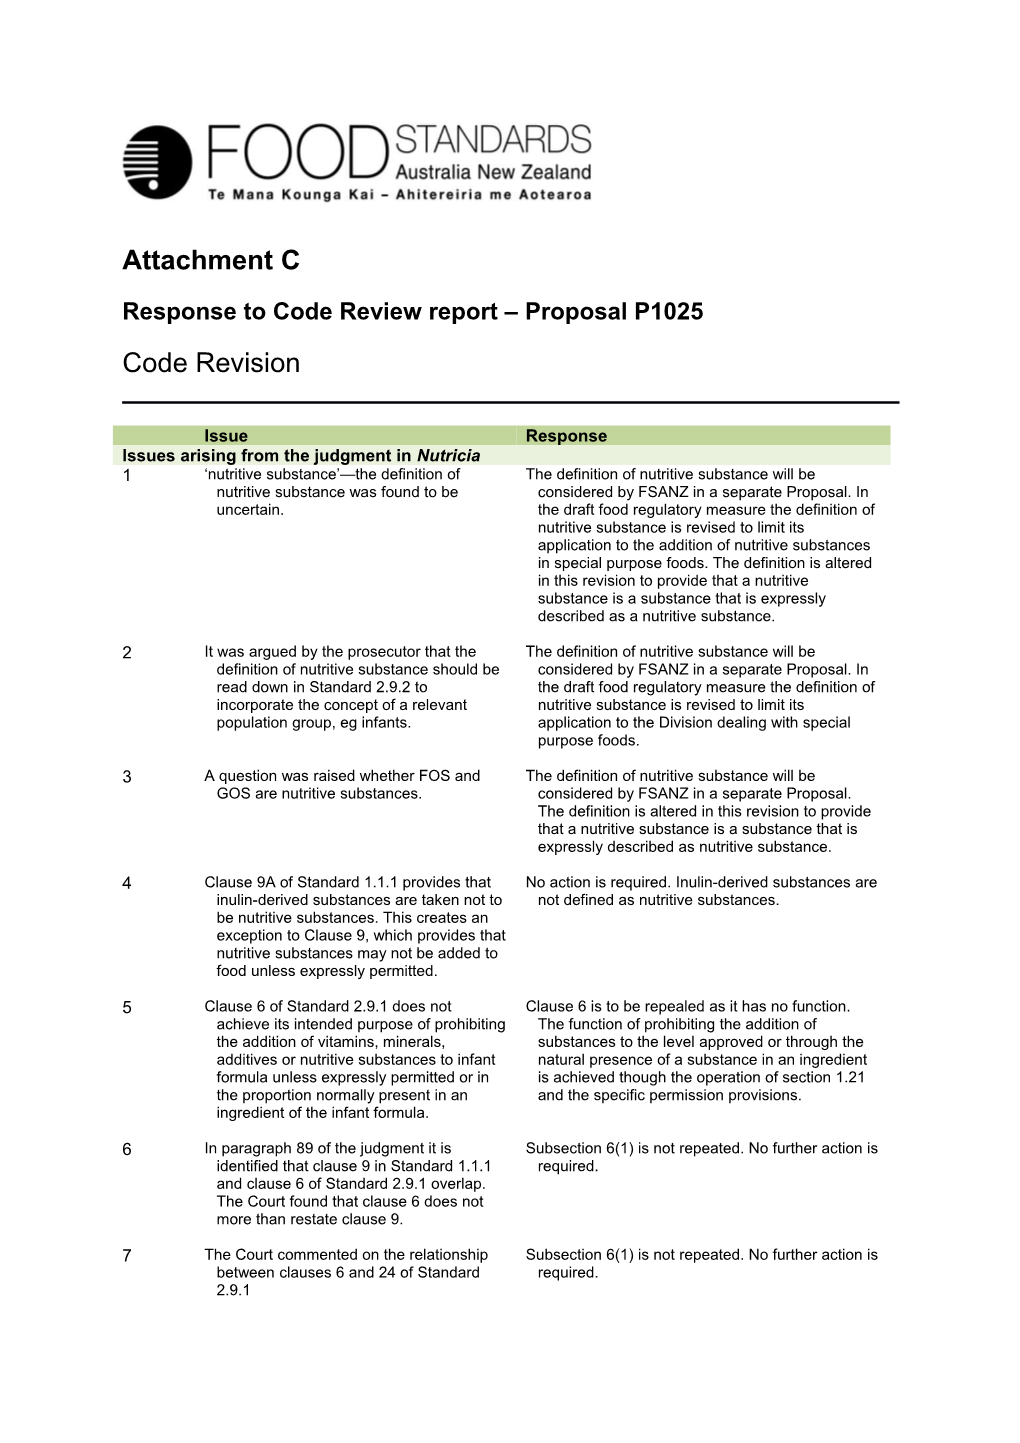 Response to Code Review Report Proposal P1025